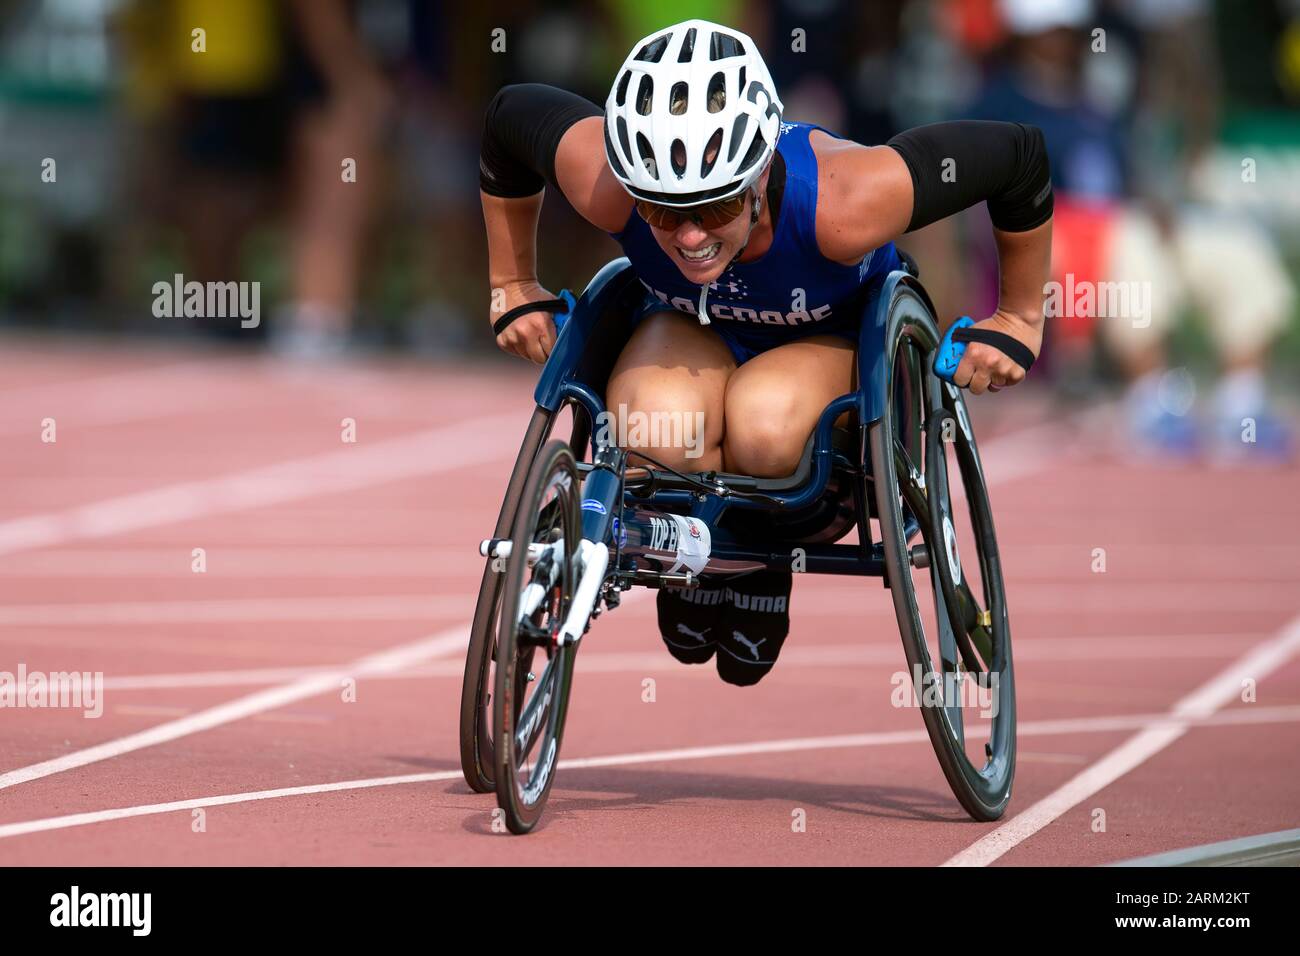 Air Force Kristen Morris races a wheelchair during the 2019 DoD Warrior Games in Tampa, Fla. June 22, 2019. (DoD photo by EJ Hersom) Stock Photo